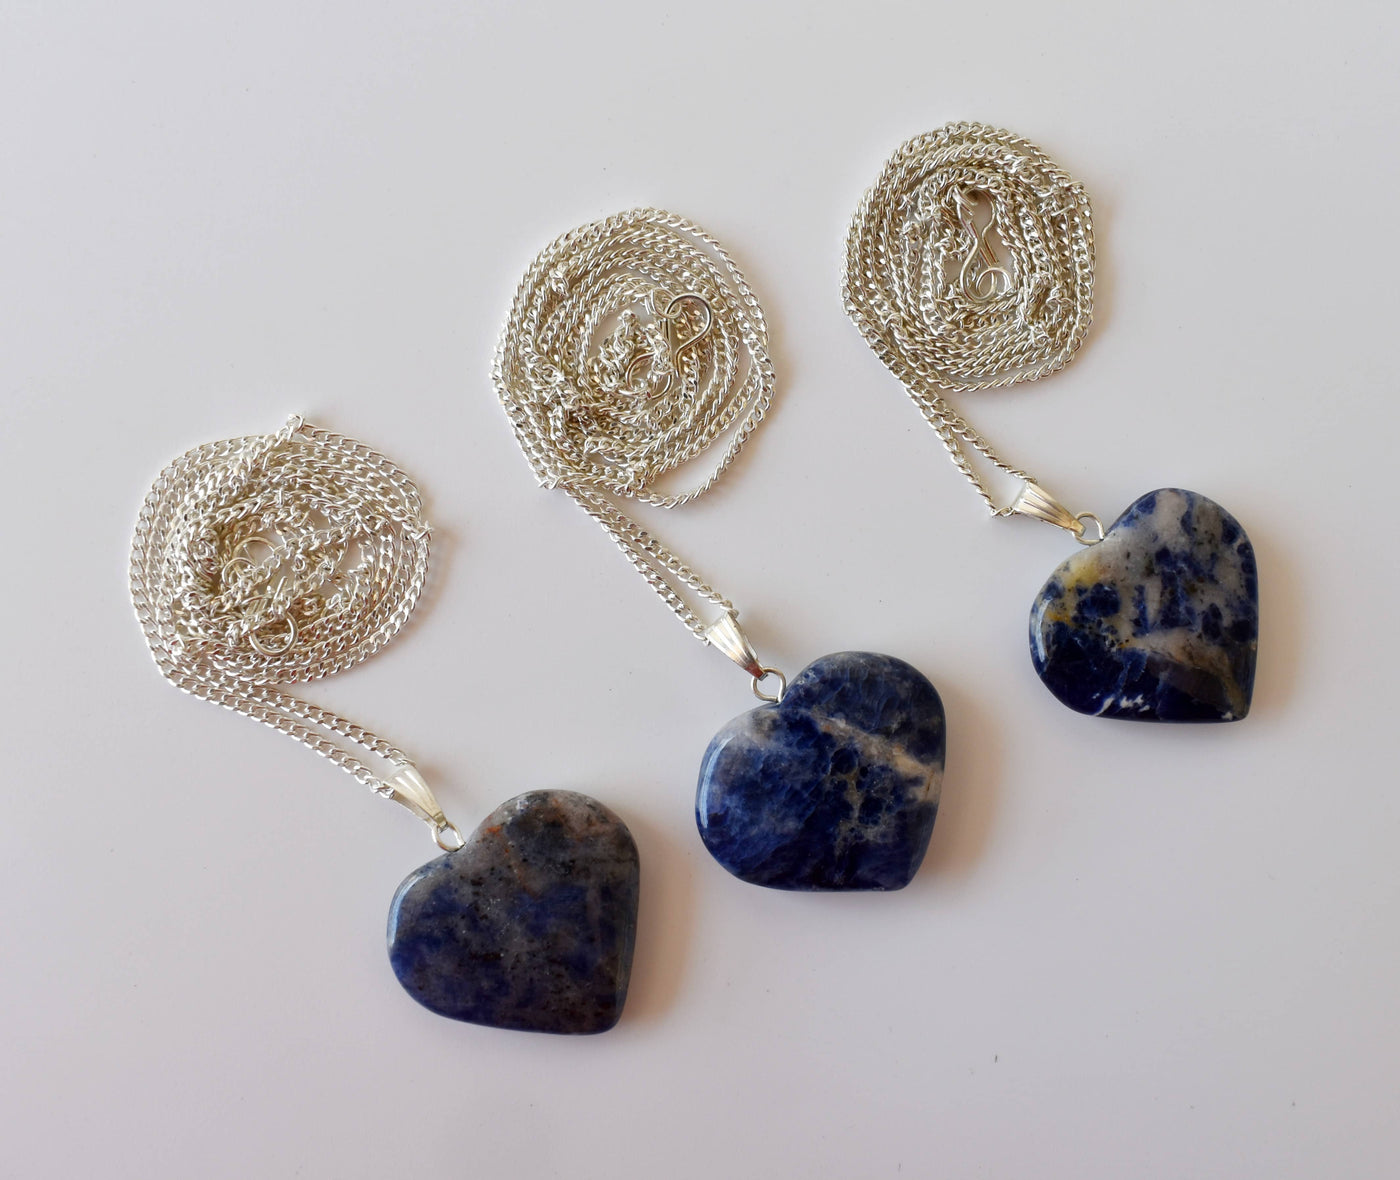 Real Sodalite Crystal Heart Pendant, Genuine Heart Shaped Necklaces